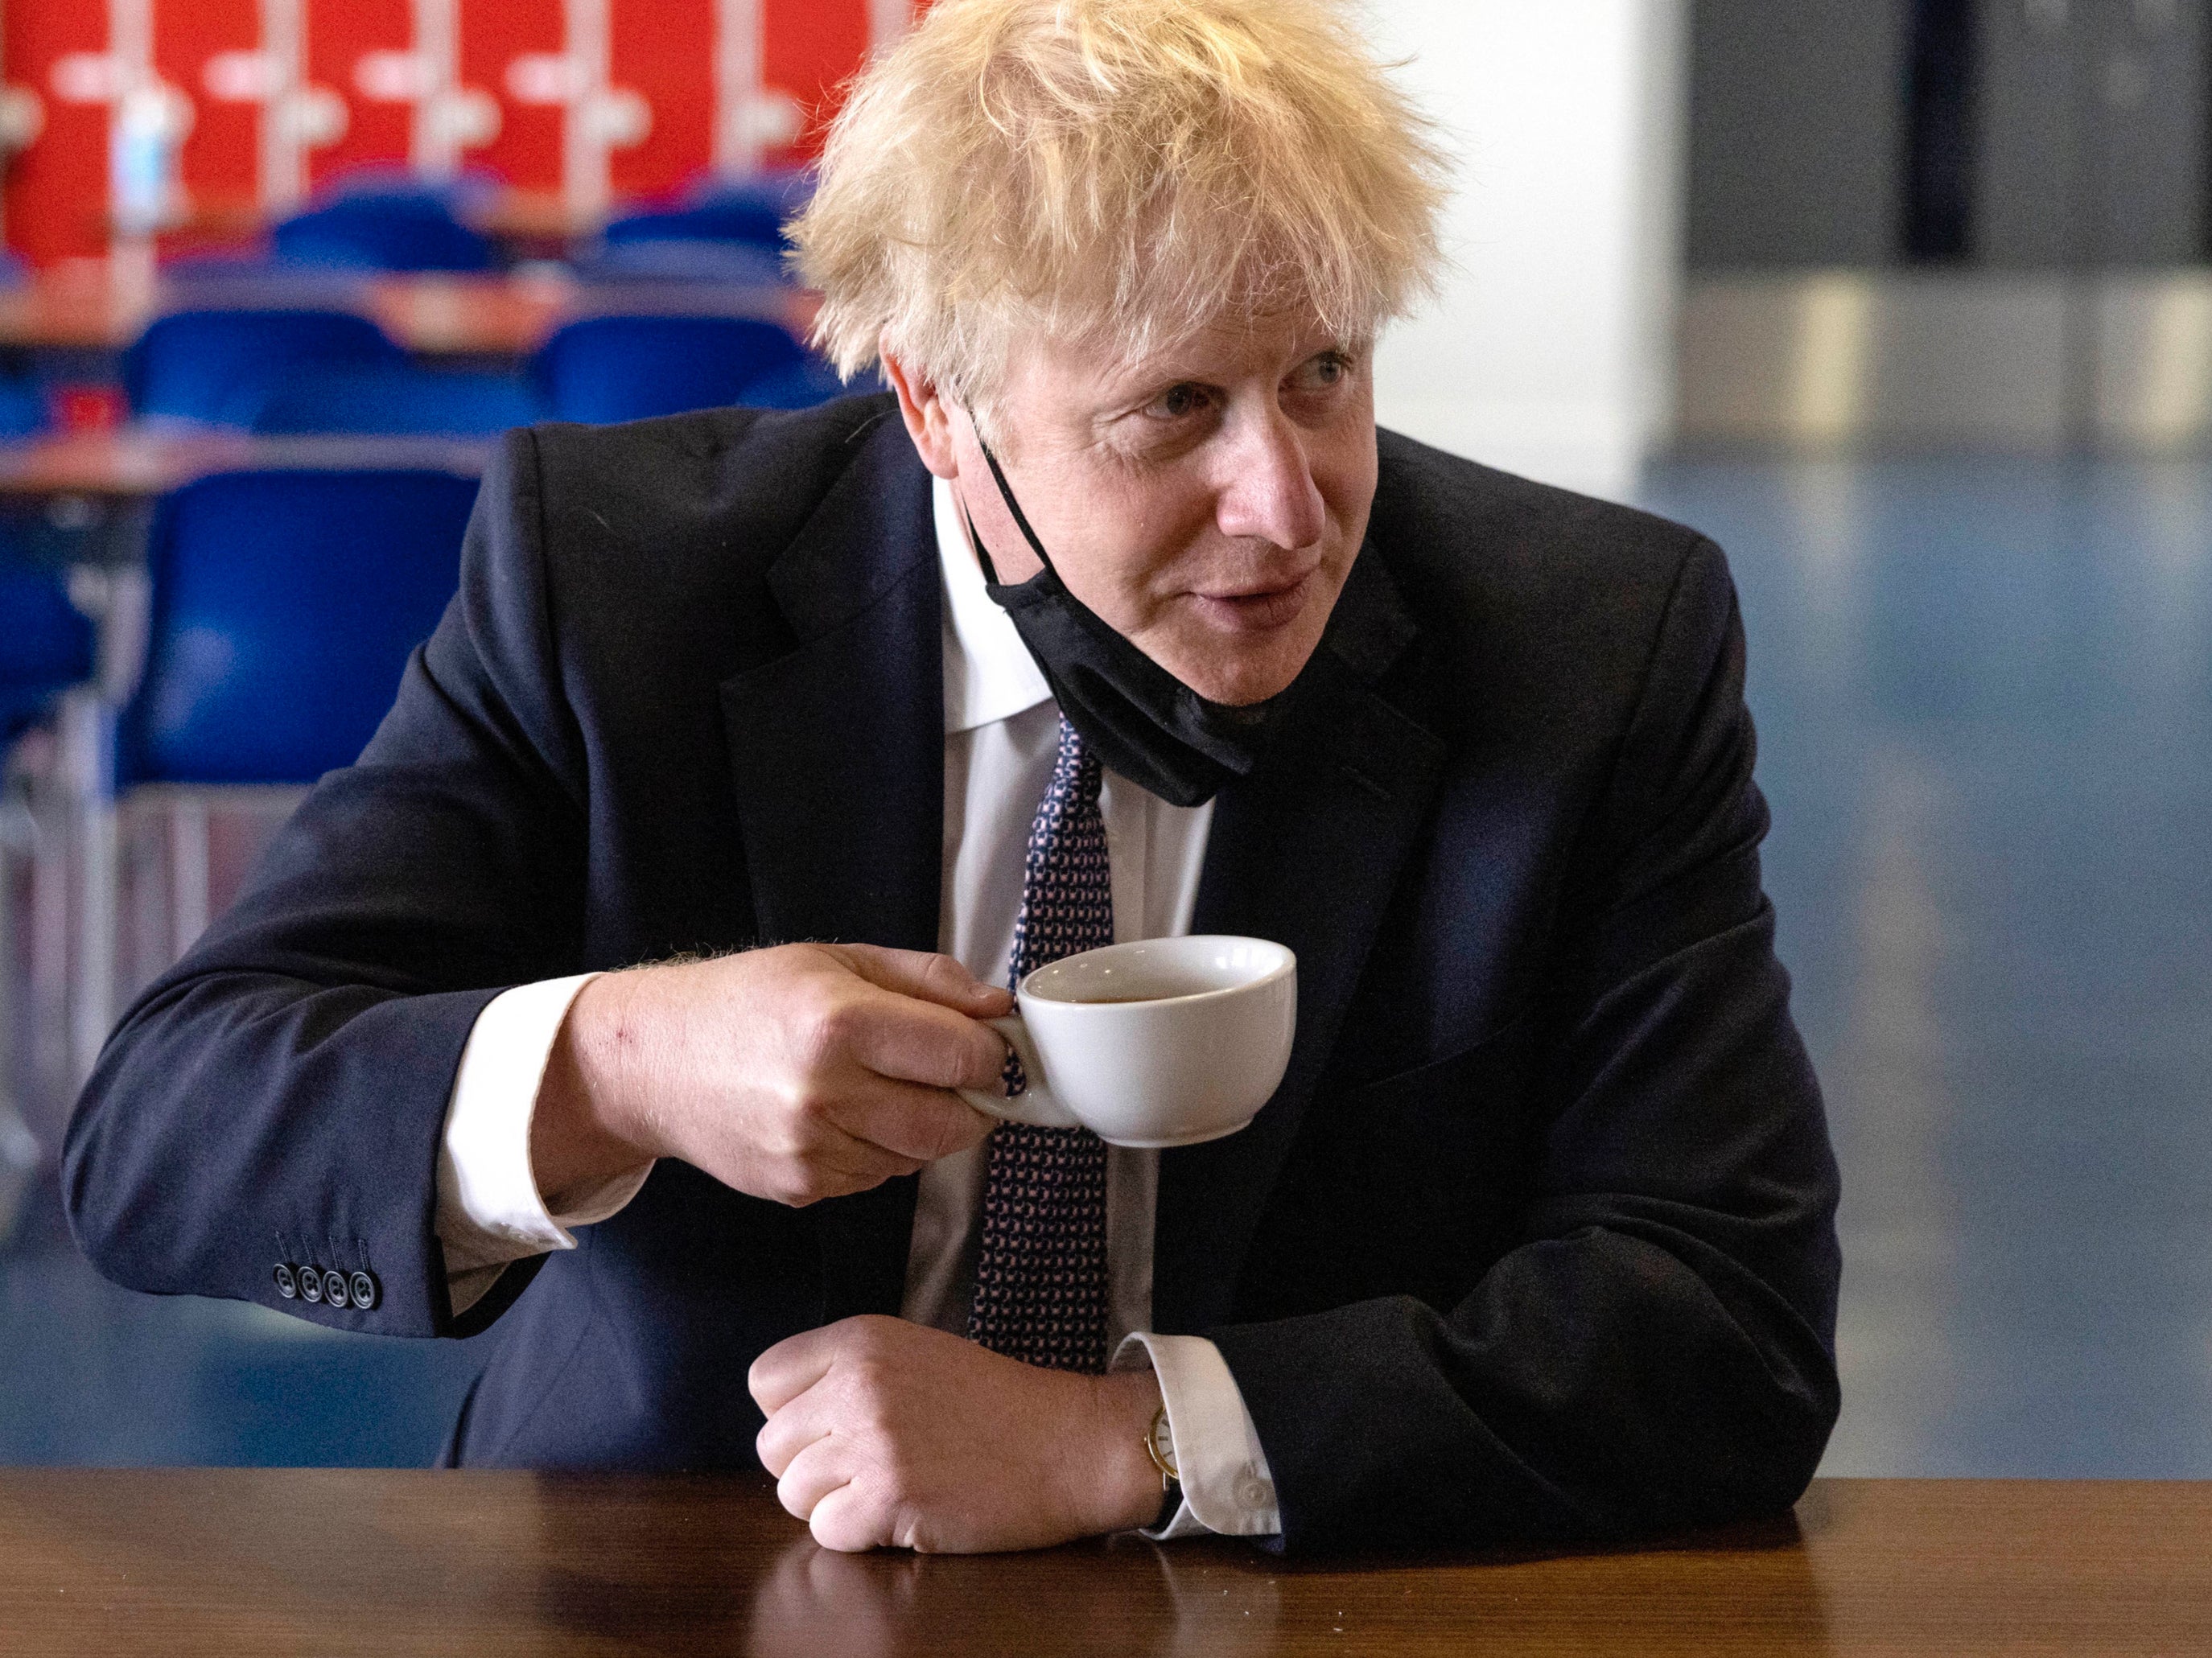 File photo of Boris Johnson drinking a cup of coffee